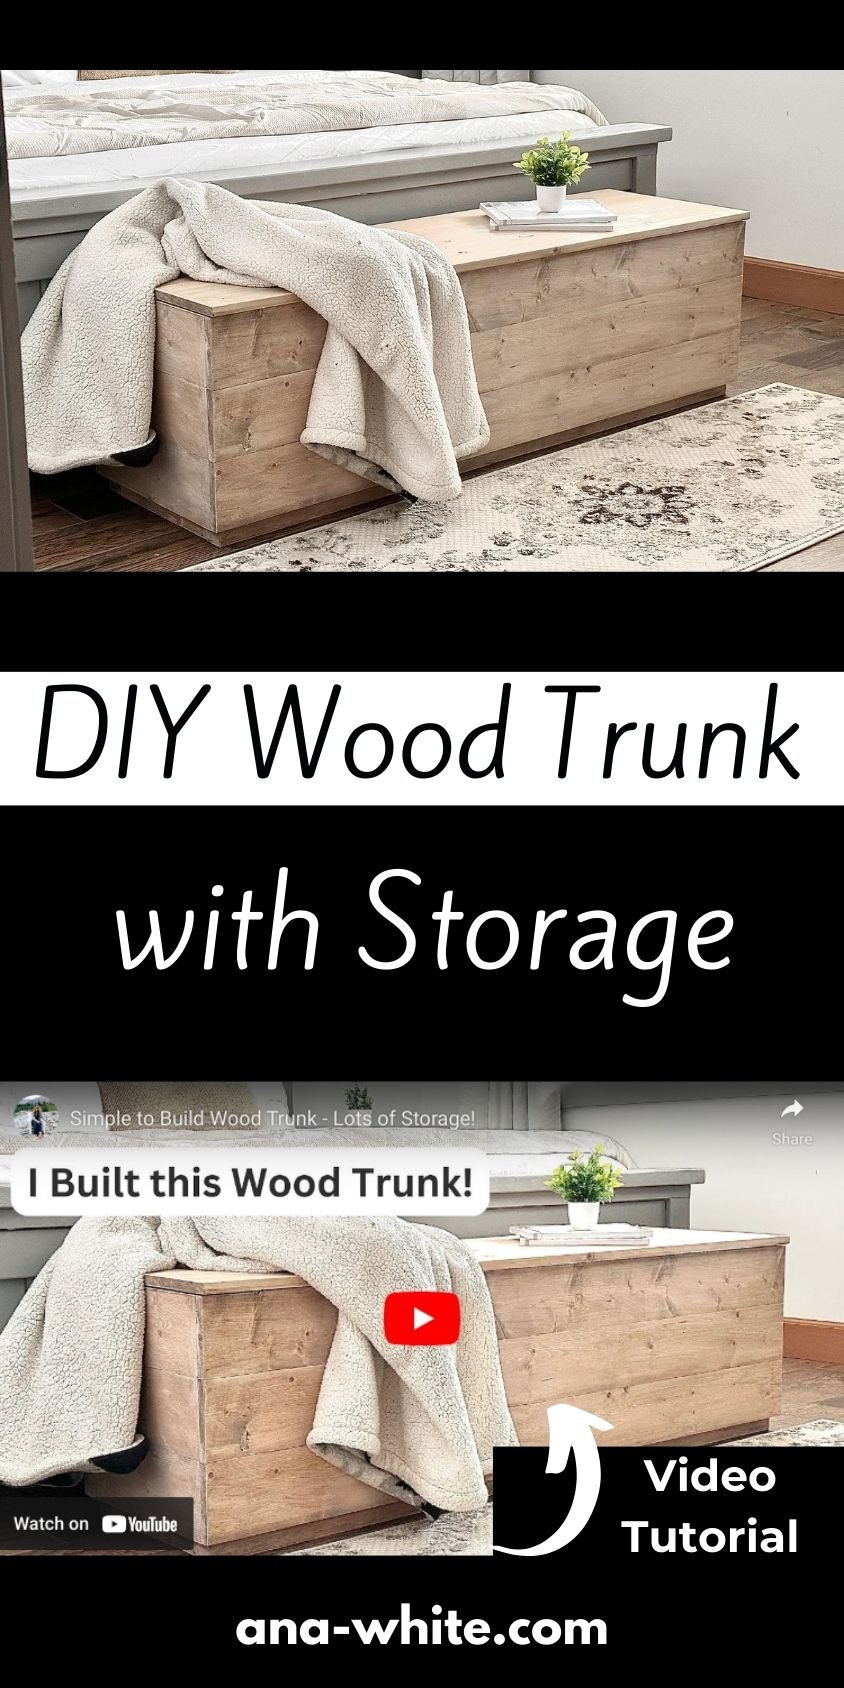 DIY Wood Trunk with Storage - Free Woodworking Plan